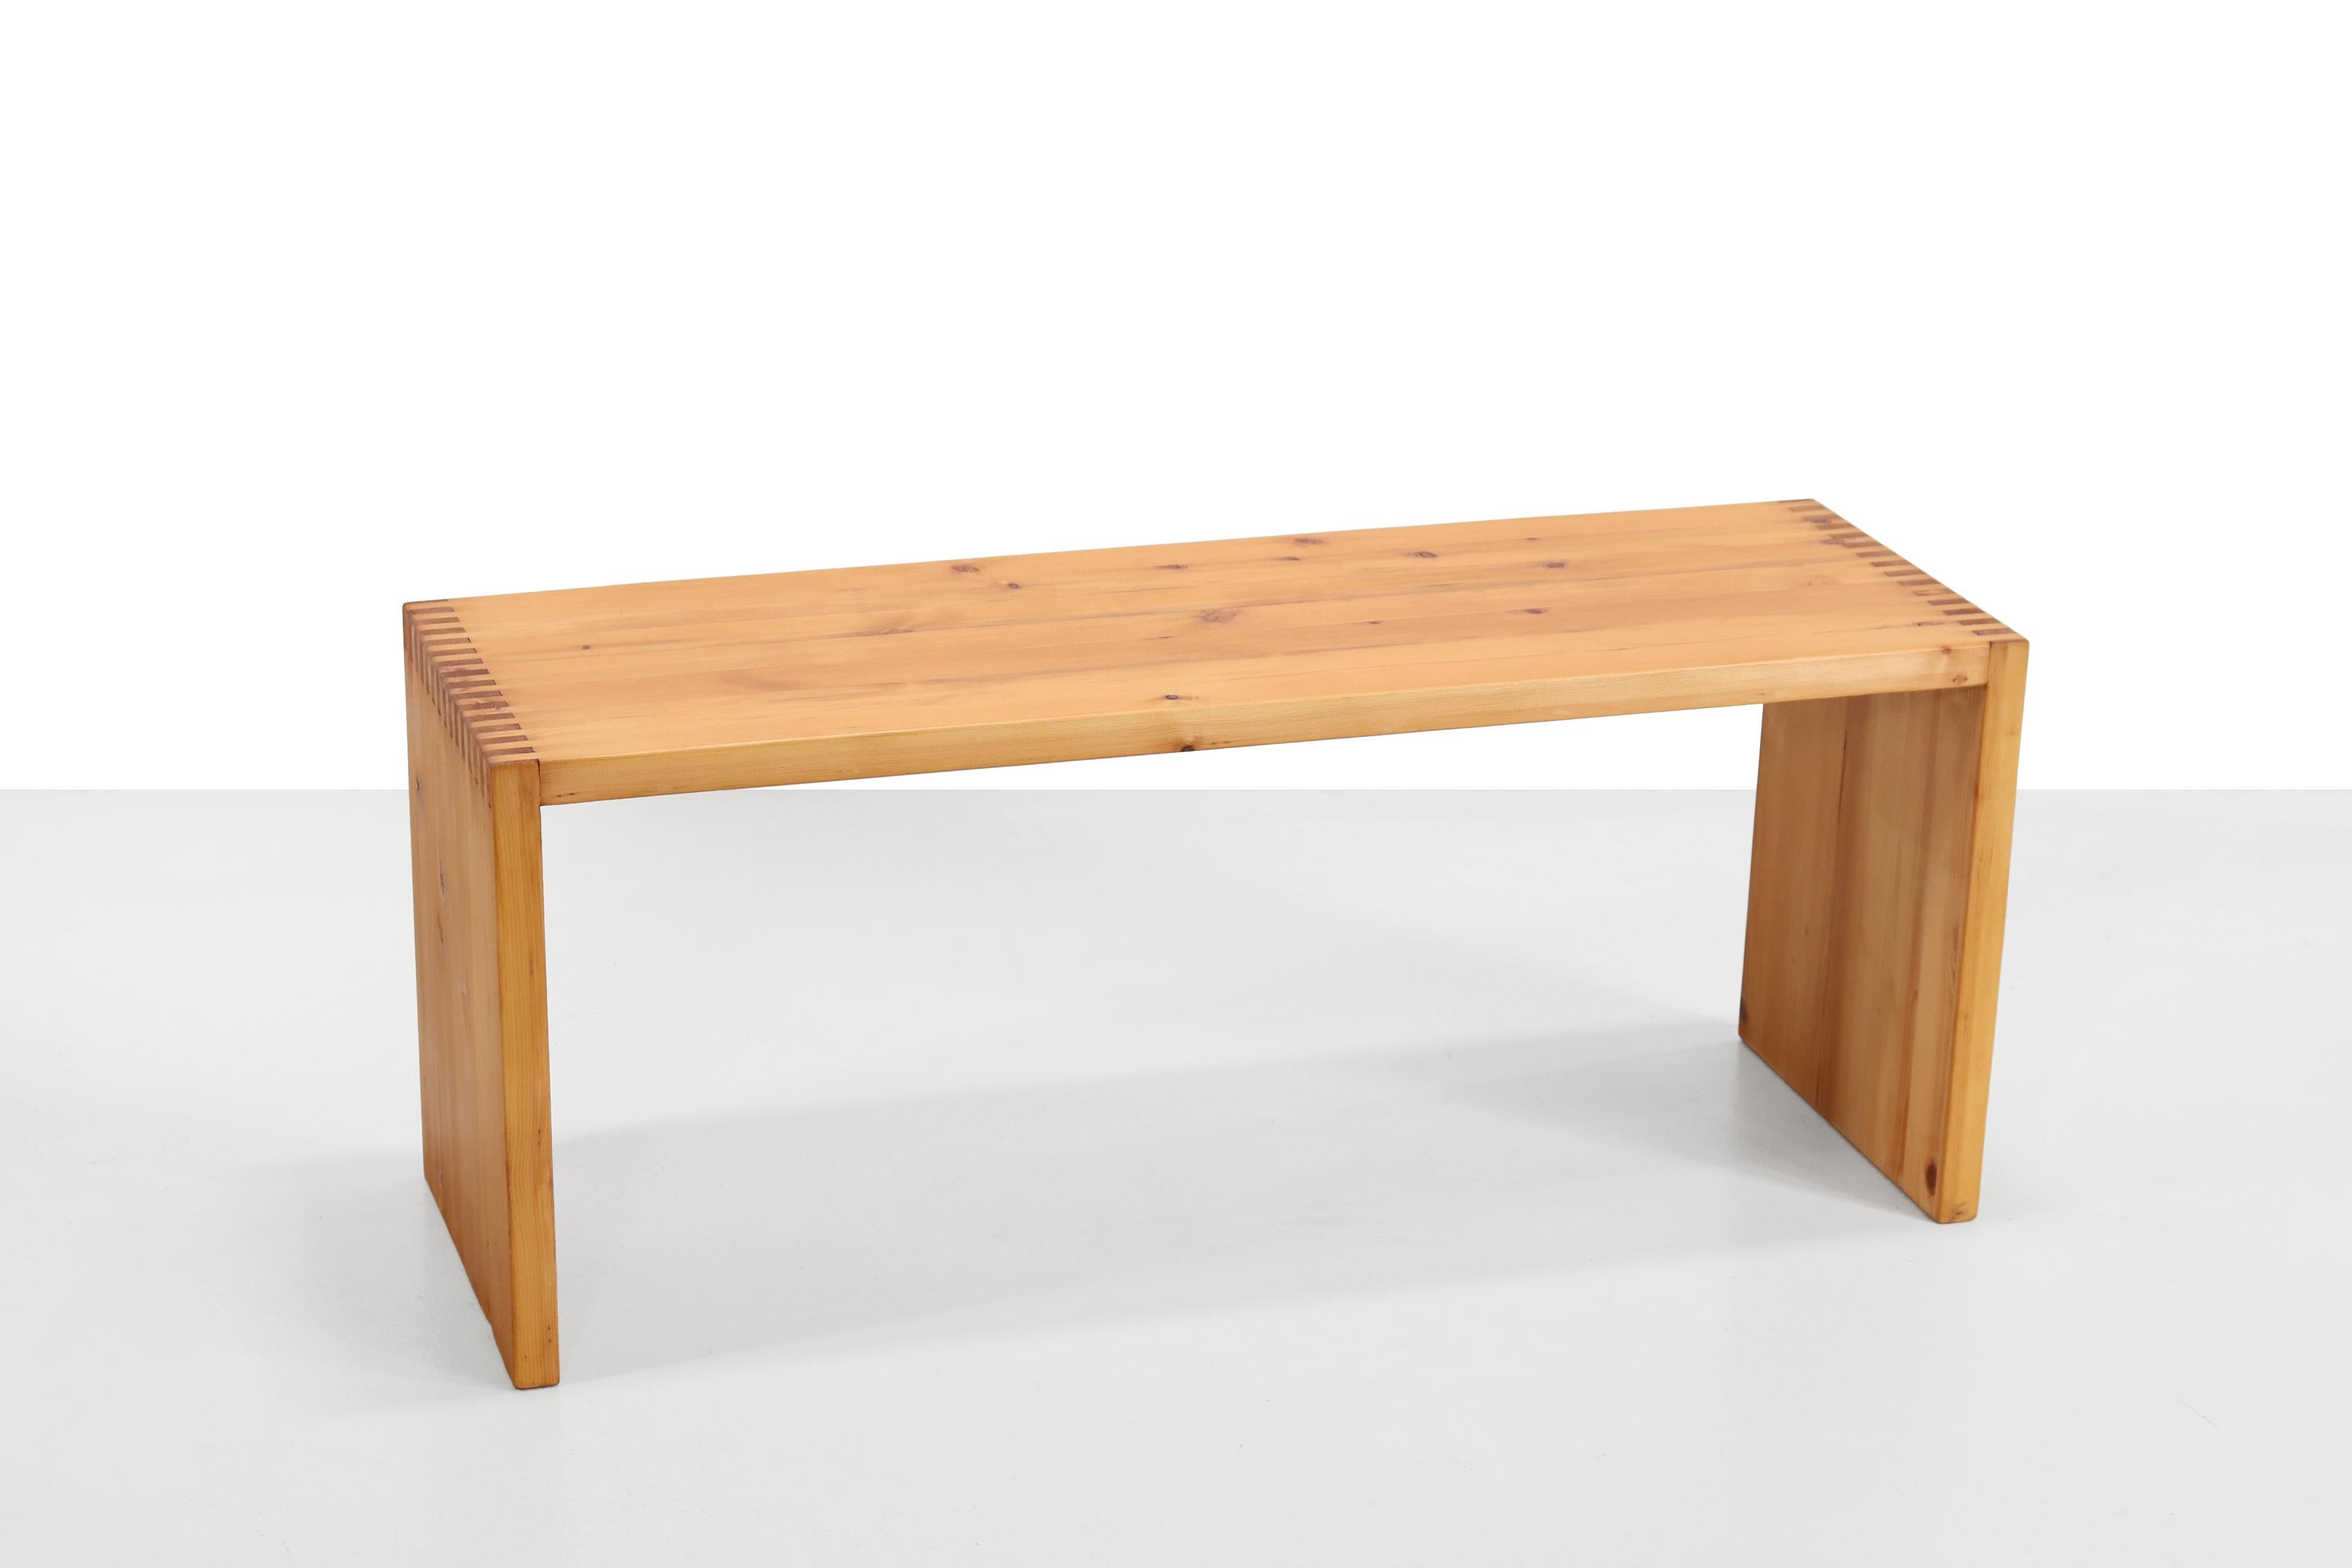 Beautiful pine wooden bench or side table with very nice pin and hole connection in the corners. This bench is designed by Ate van Apeldoorn for Hattem Houtwerk The Netherlands in de Seventies. The bench is 90 cm wide, 30 cm deep and 37 cm high. The